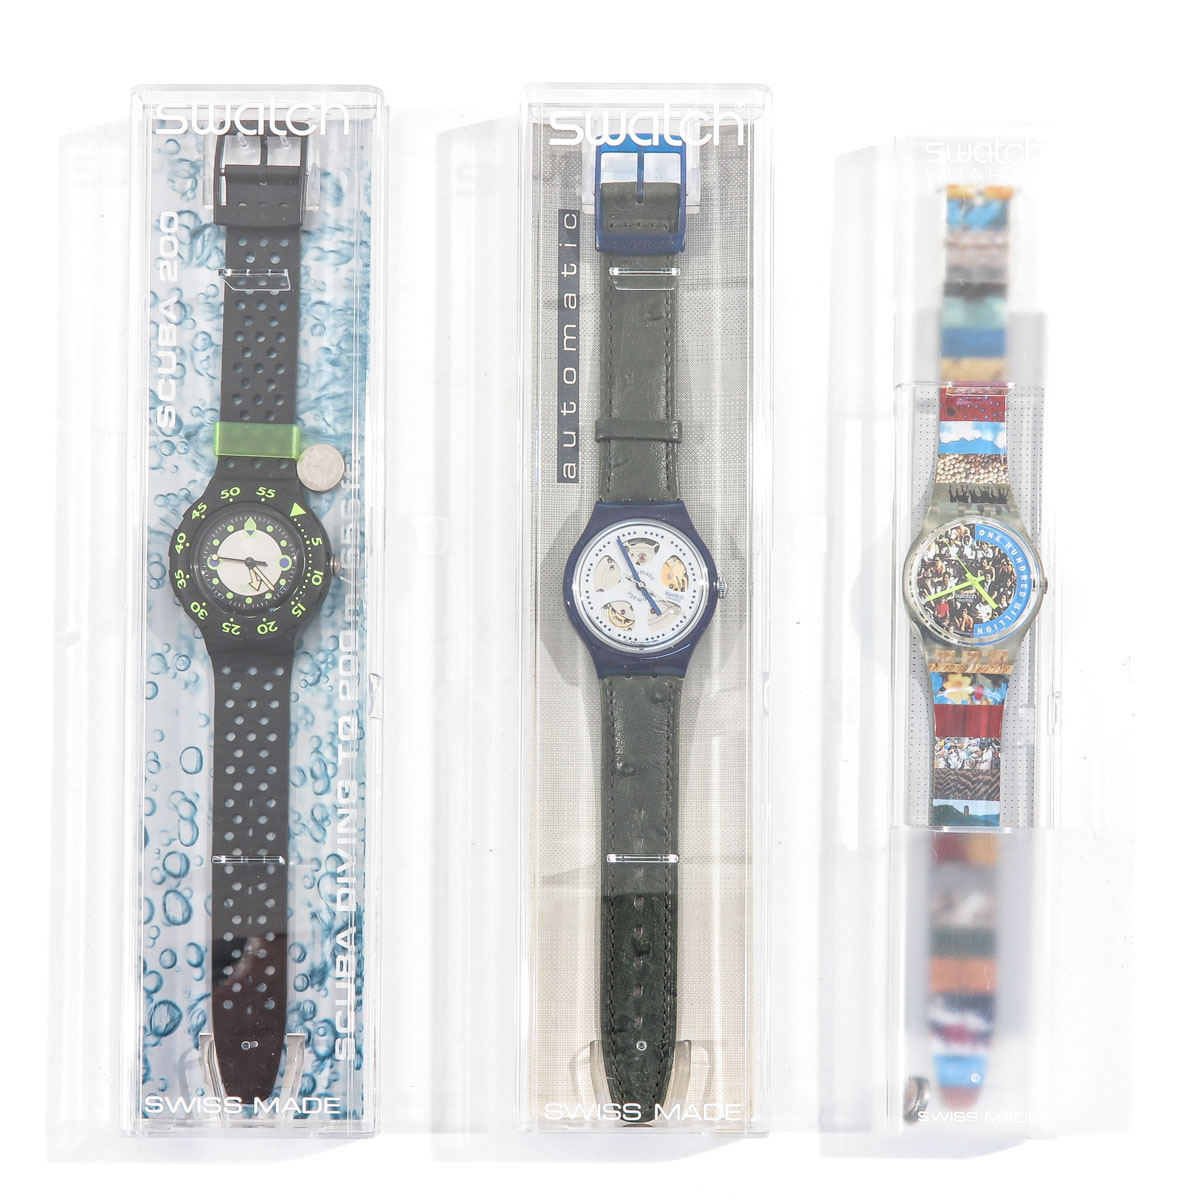 A Collection of 10 Swatch Watches - Image 5 of 8